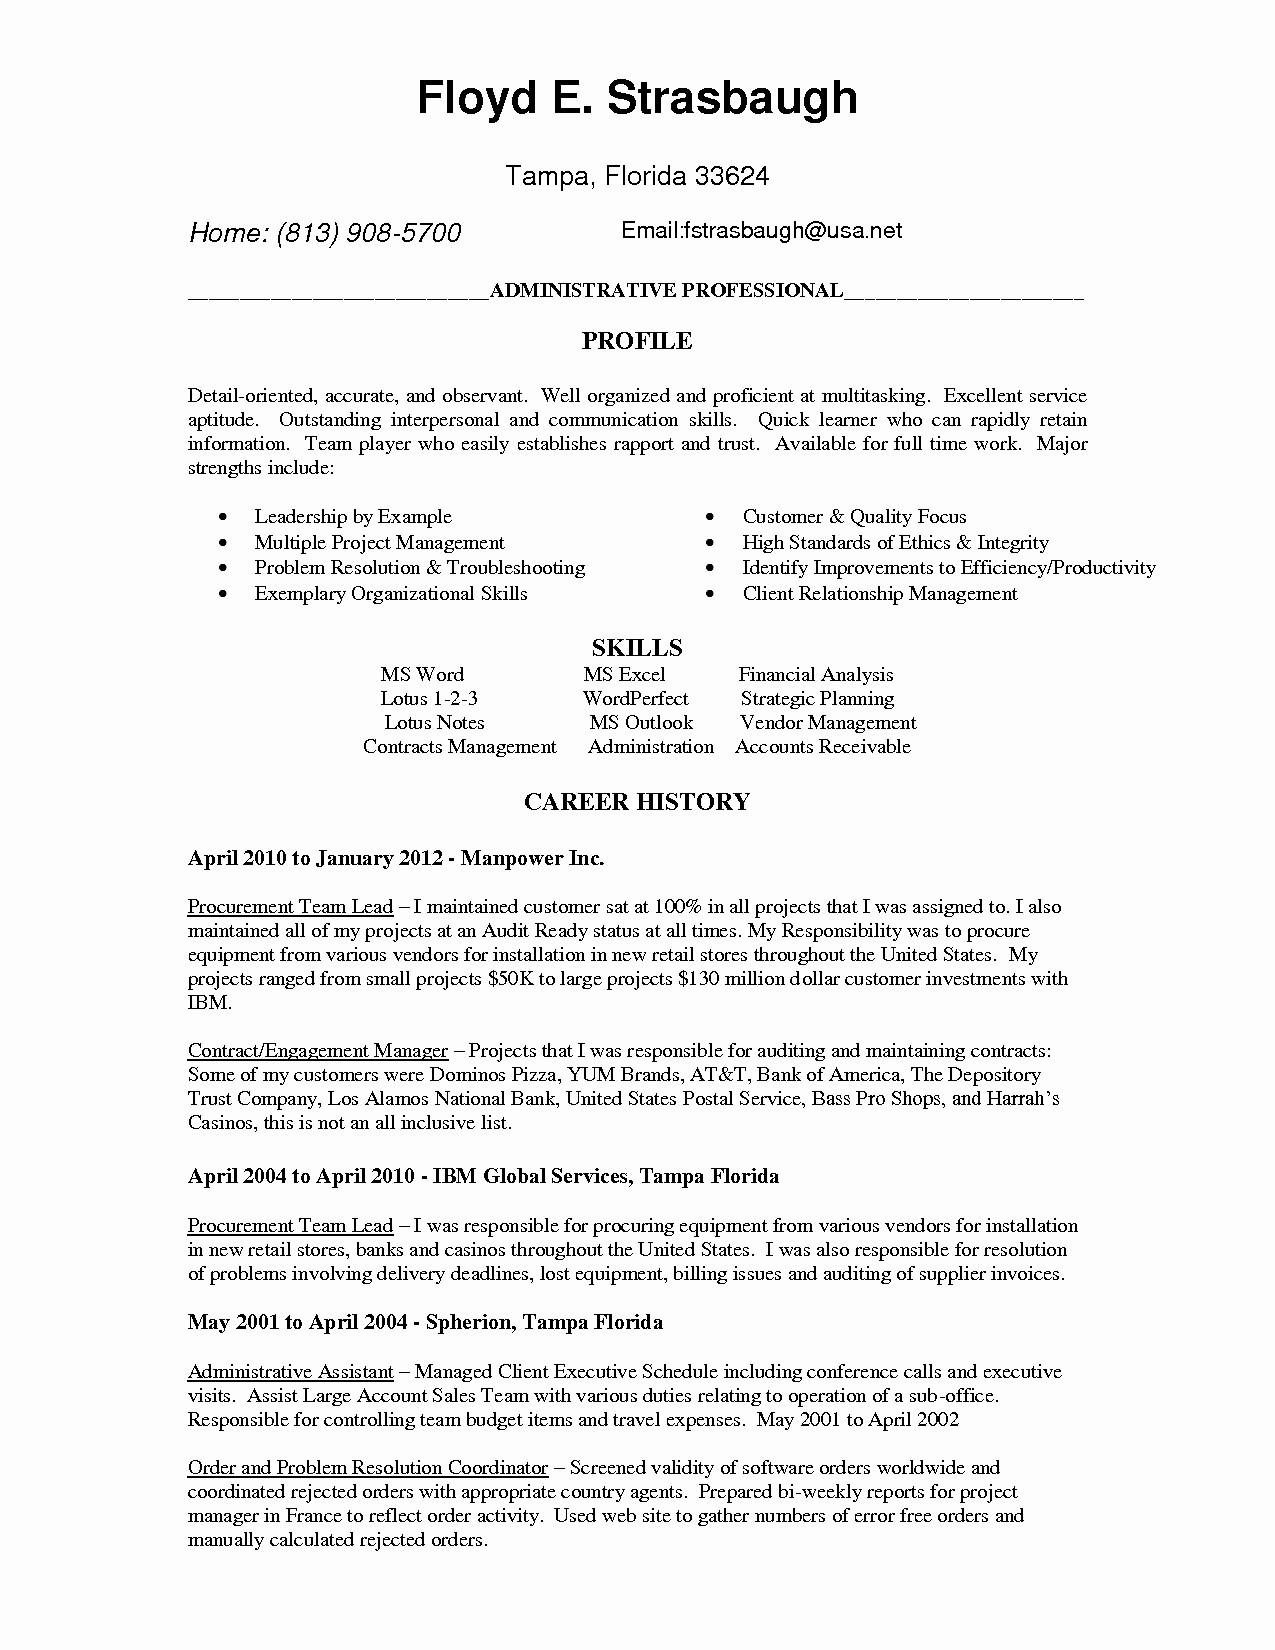 microsoft word cover letter template example-Free Microsoft Word Resume Templates Awesome Professional Job Resume Template Od Specialist Cover Letter Lead Staggering Business Ppt Templates Free 5-m